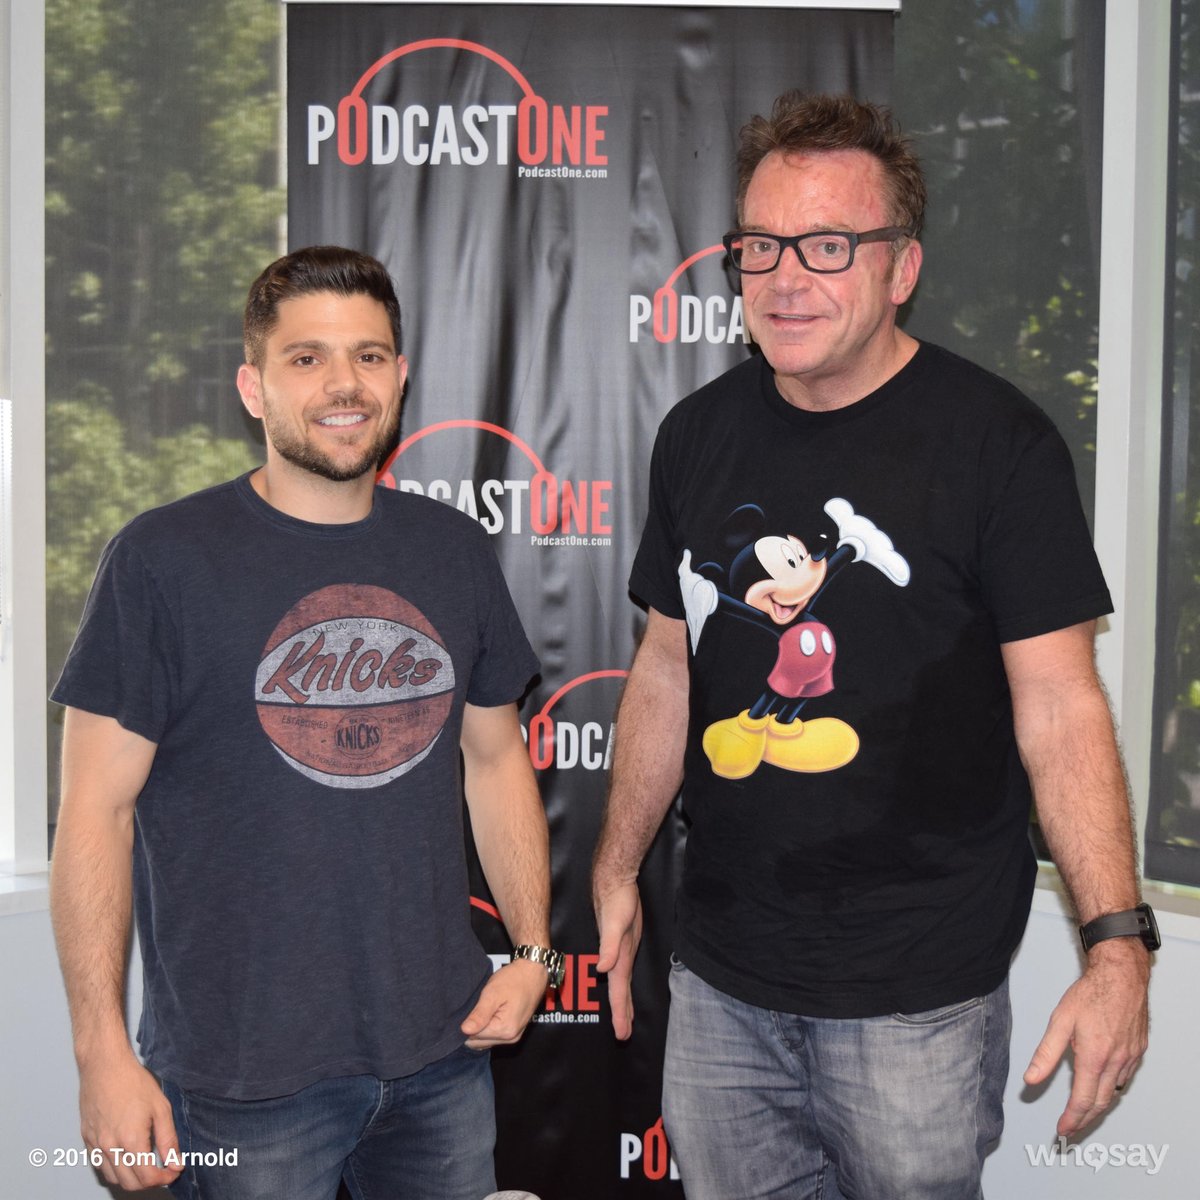 RT @TomArnold: At midnight new Podcast with awesome @jerryferrara Of Starz POWER & Bad 4 Business Podcast
https://t.co/naLCRU7DZ0 https://t…